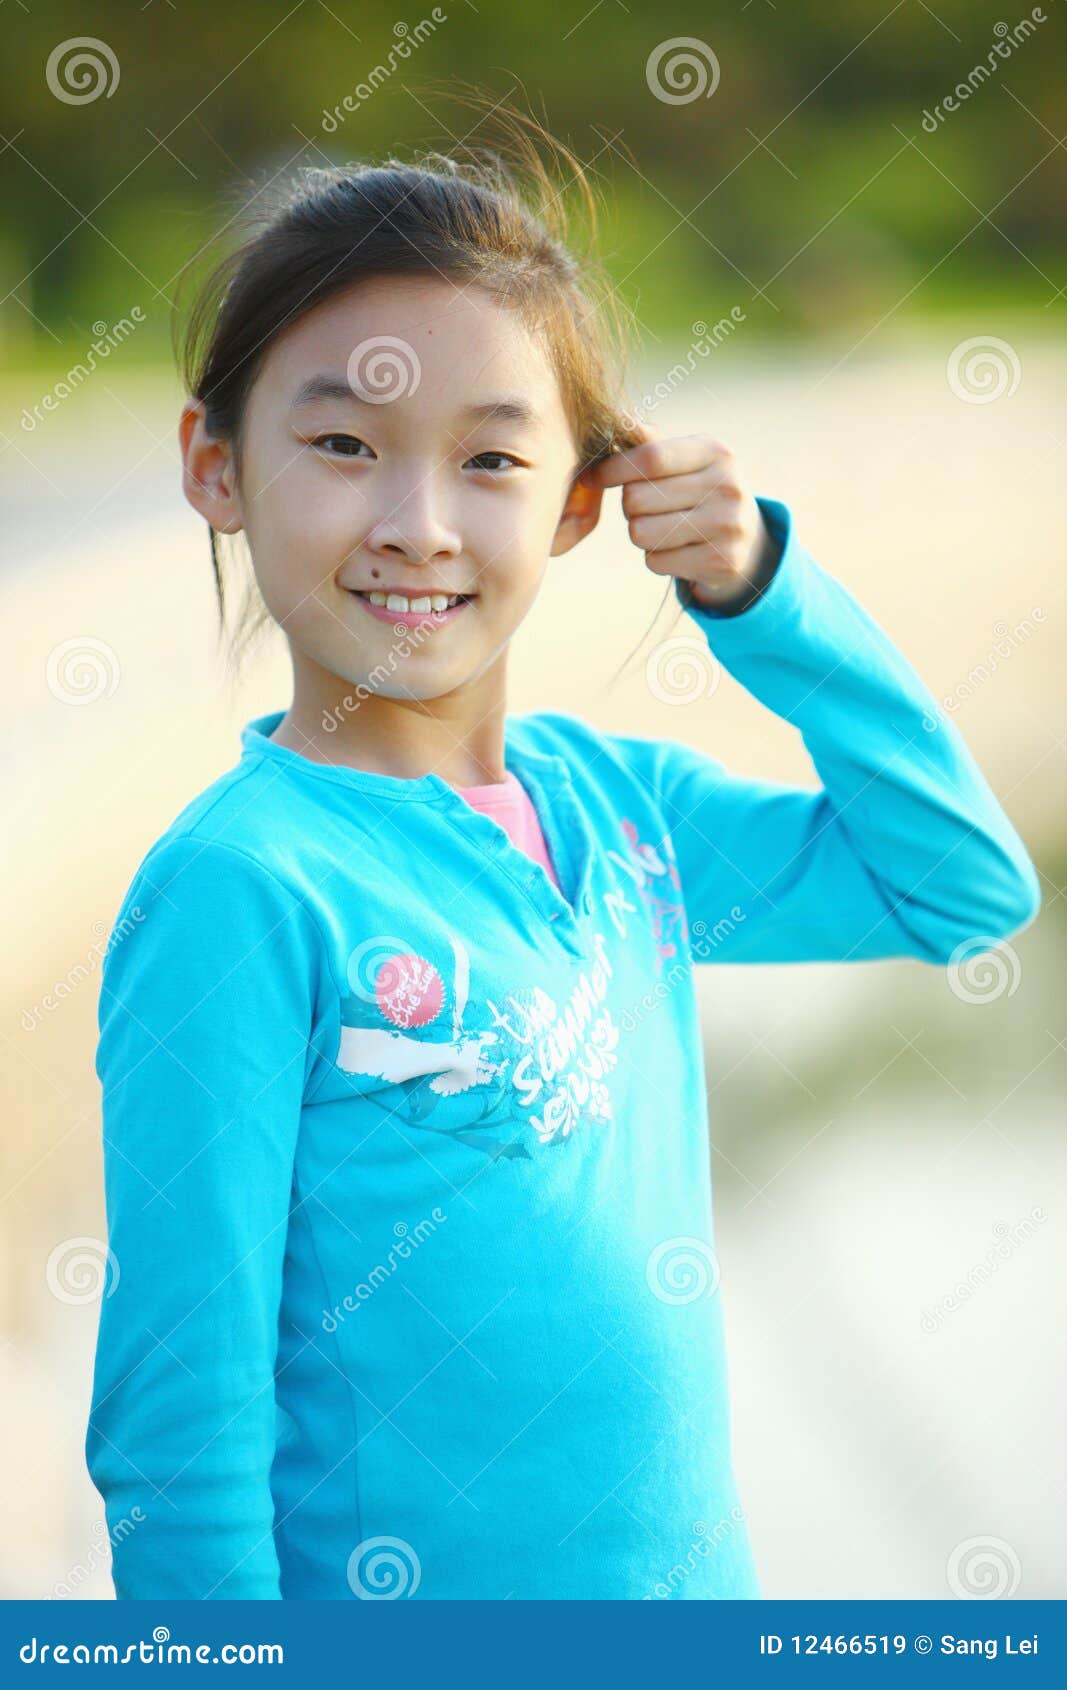 Asian child stock image. Image of student, happy, detail - 12466519